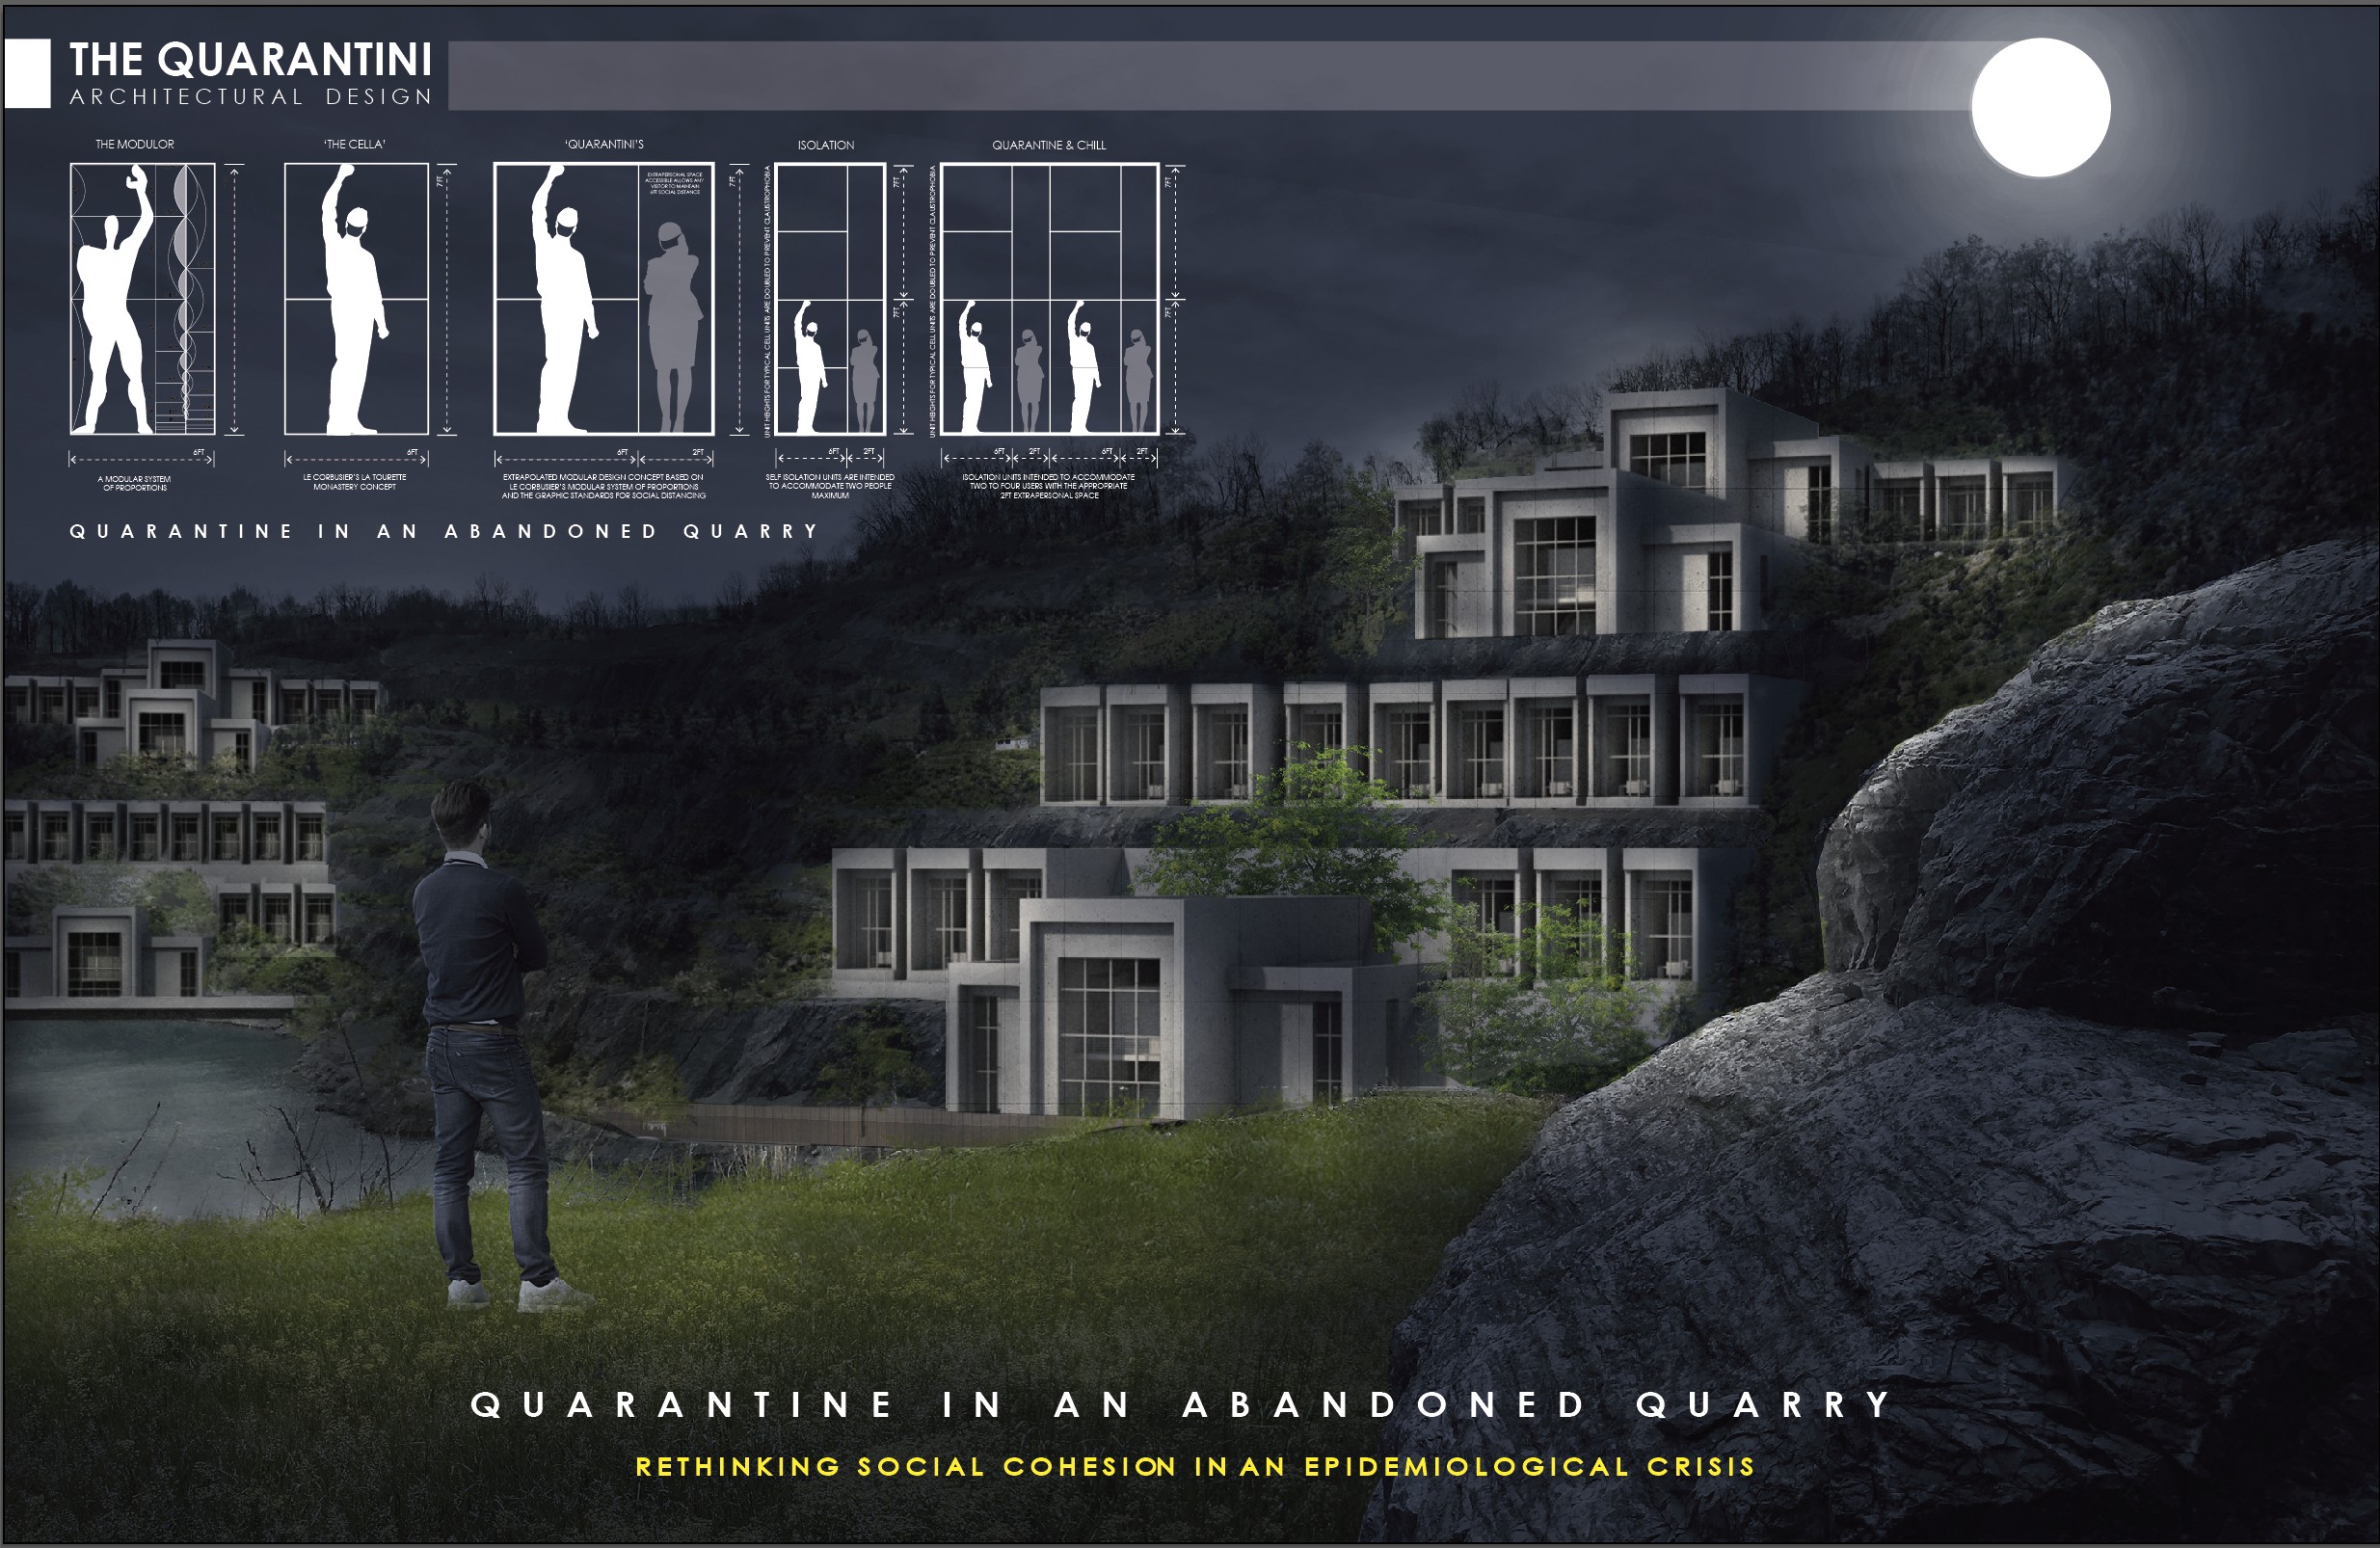 architectural rendering of "Quarantine in an Abandoned Quarry" - Rethinking social cohesion in an epidemiological crisis